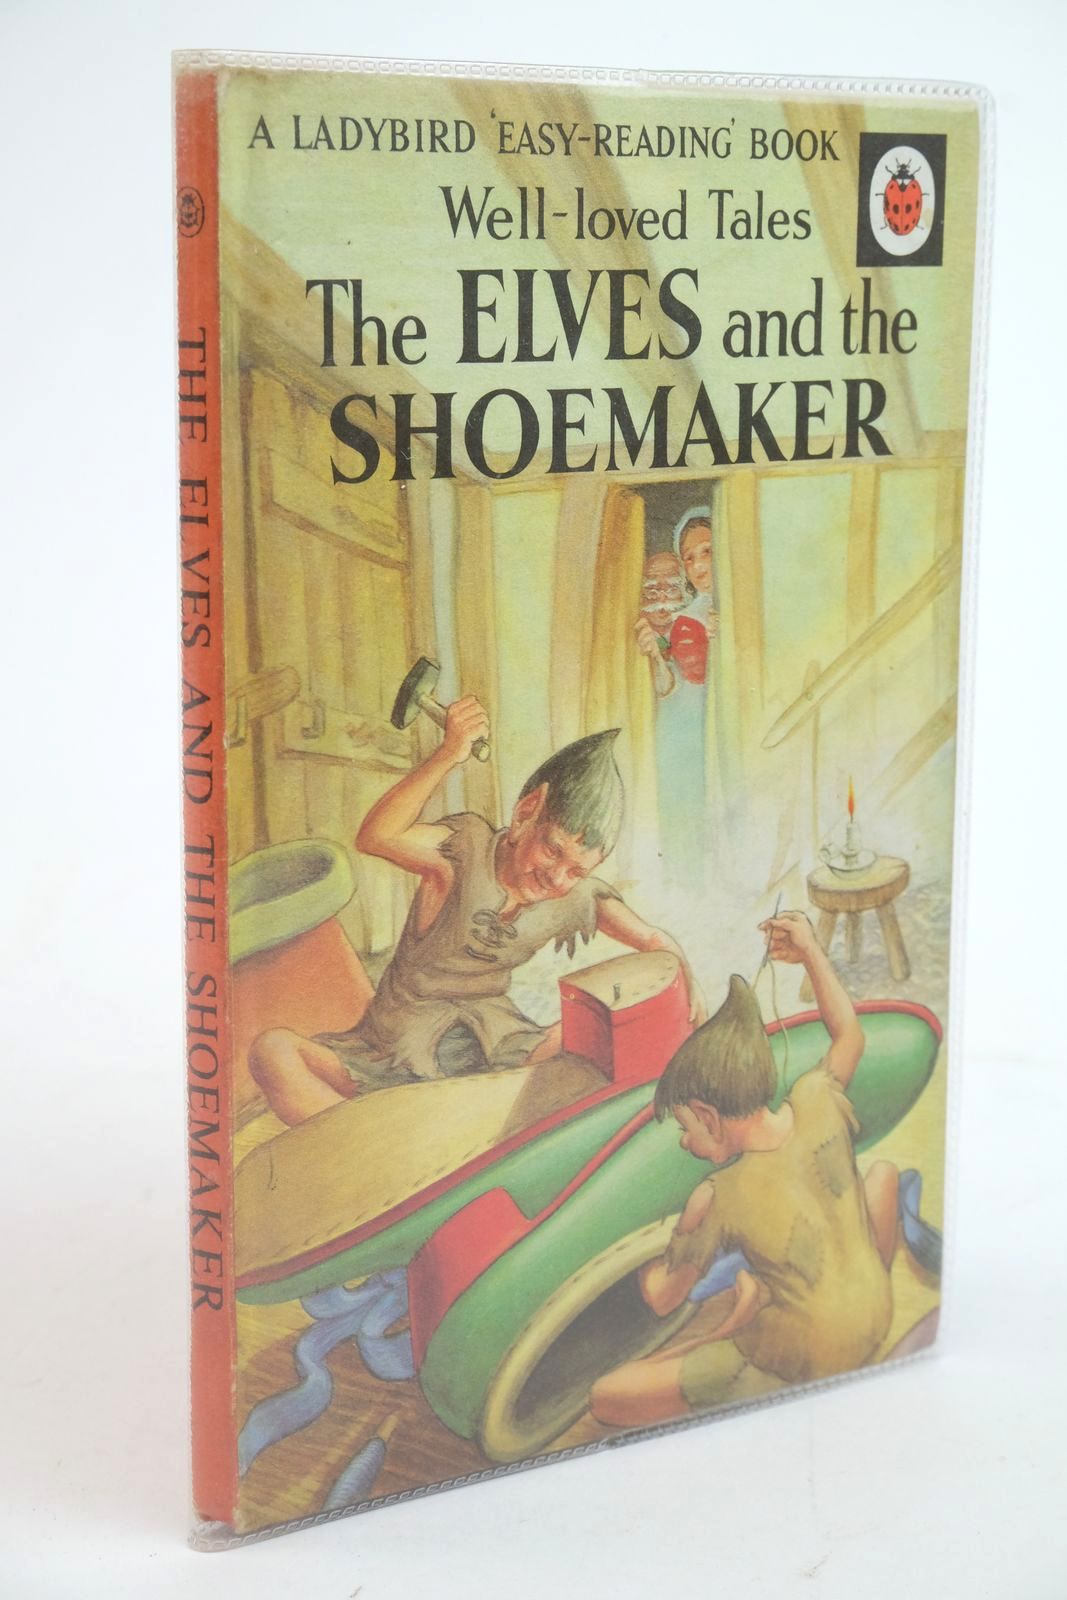 Photo of THE ELVES AND THE SHOEMAKER written by Southgate, Vera illustrated by Lumley, Robert published by Wills & Hepworth Ltd. (STOCK CODE: 1322384)  for sale by Stella & Rose's Books